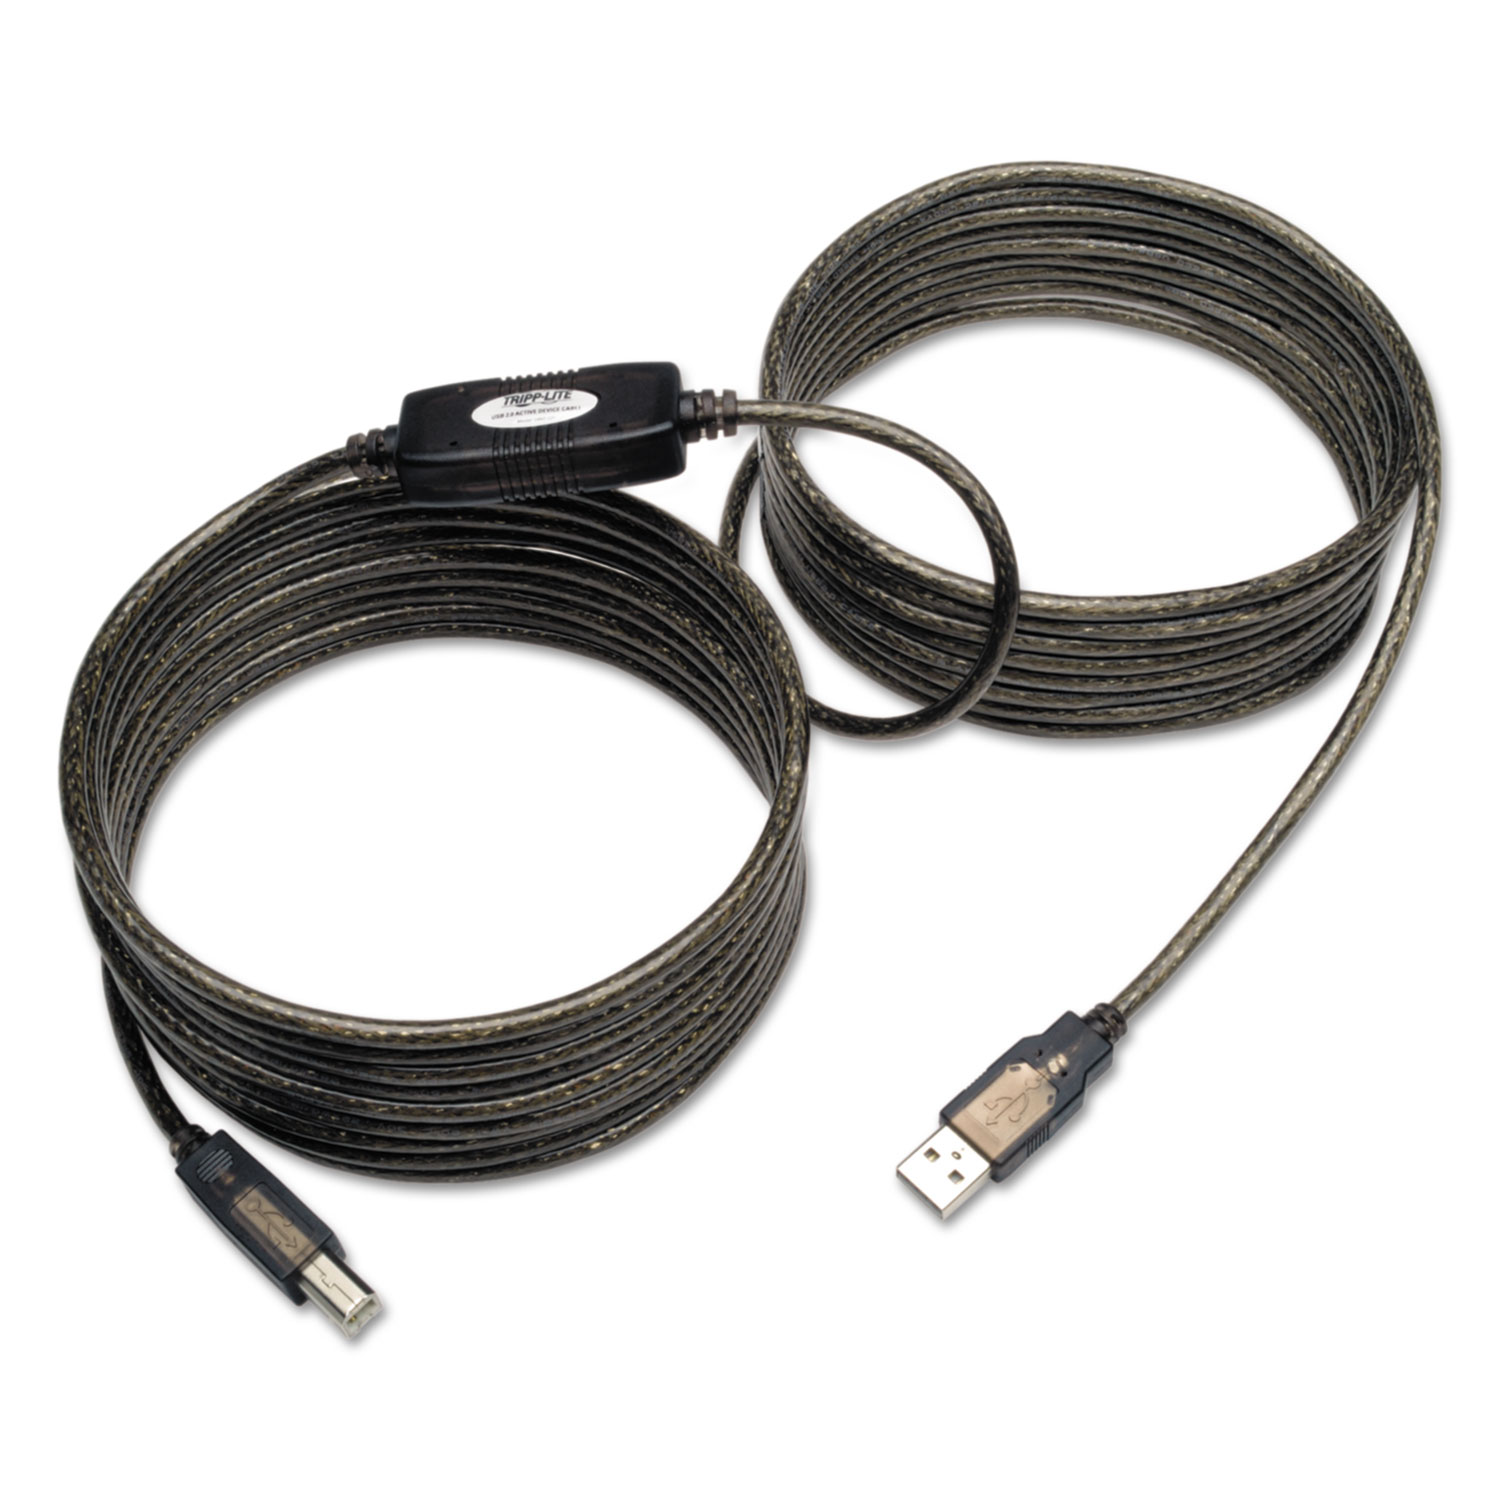  Tripp Lite U042-025 USB 2.0 Active Repeater Cable, A to B (M/M), 25 ft., Black (TRPU042025) 